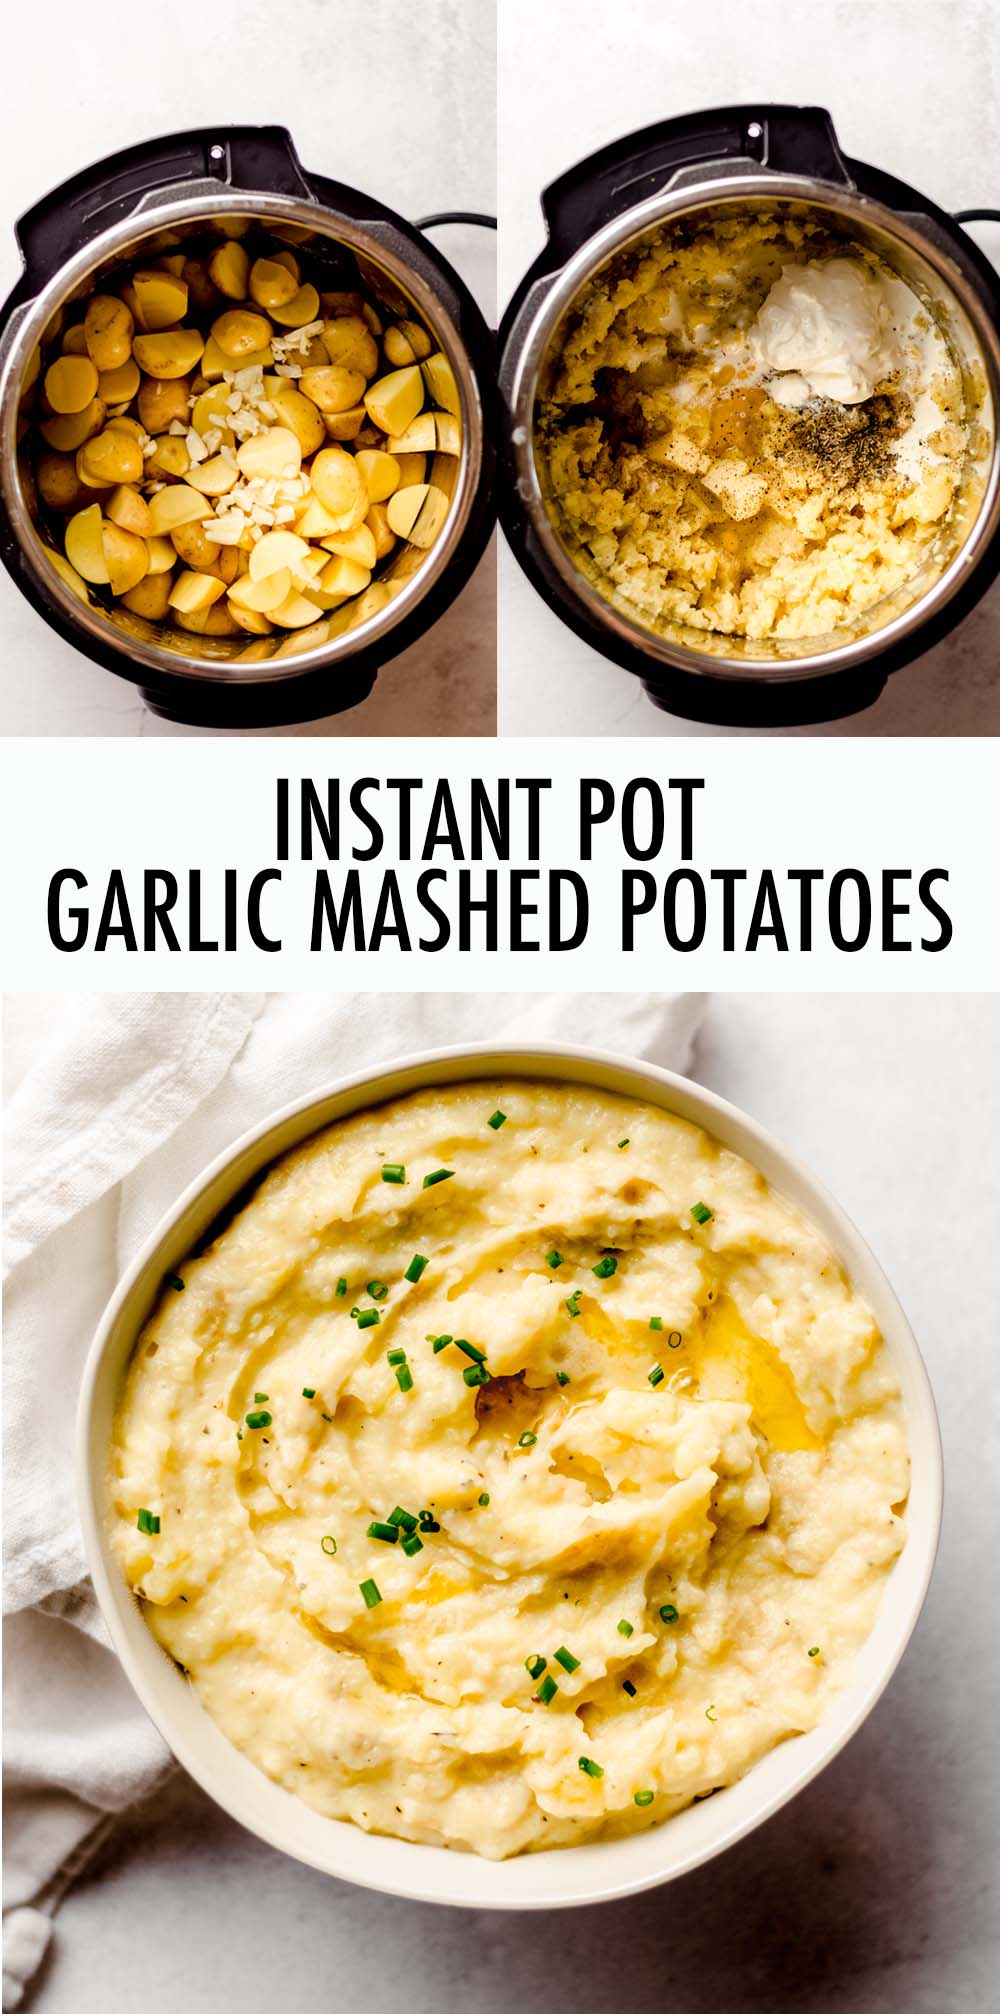 Just a few minutes of ingredient prep, then let your Instant Pot do the rest! These garlic mashed potatoes can be made creamy and smooth or textured and chunky. No matter how you like to eat them, you're going to love how simple these mashed potatoes are to make. via @frshaprilflours